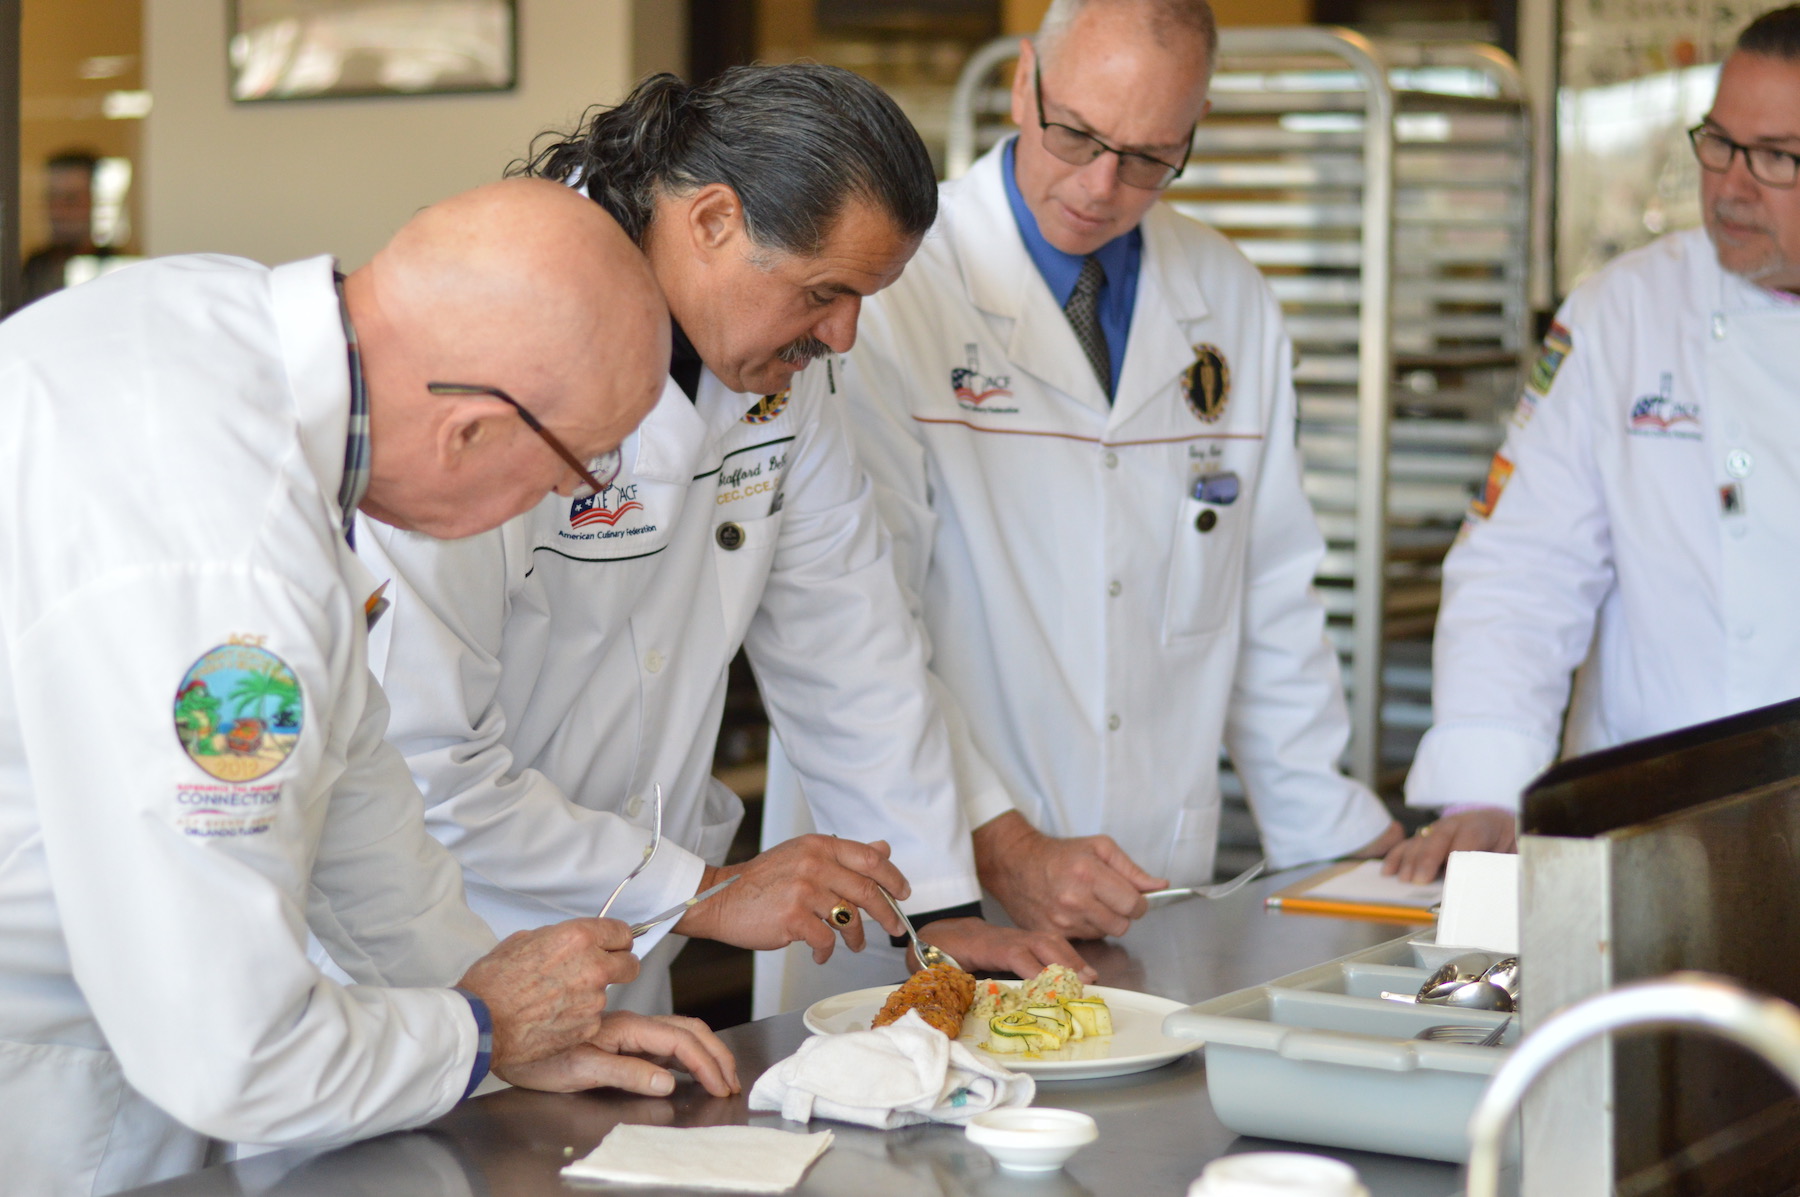 American Culinary Federations Judges examine entry in 2019 culinary competition. (Photo courtesy of NCCC)